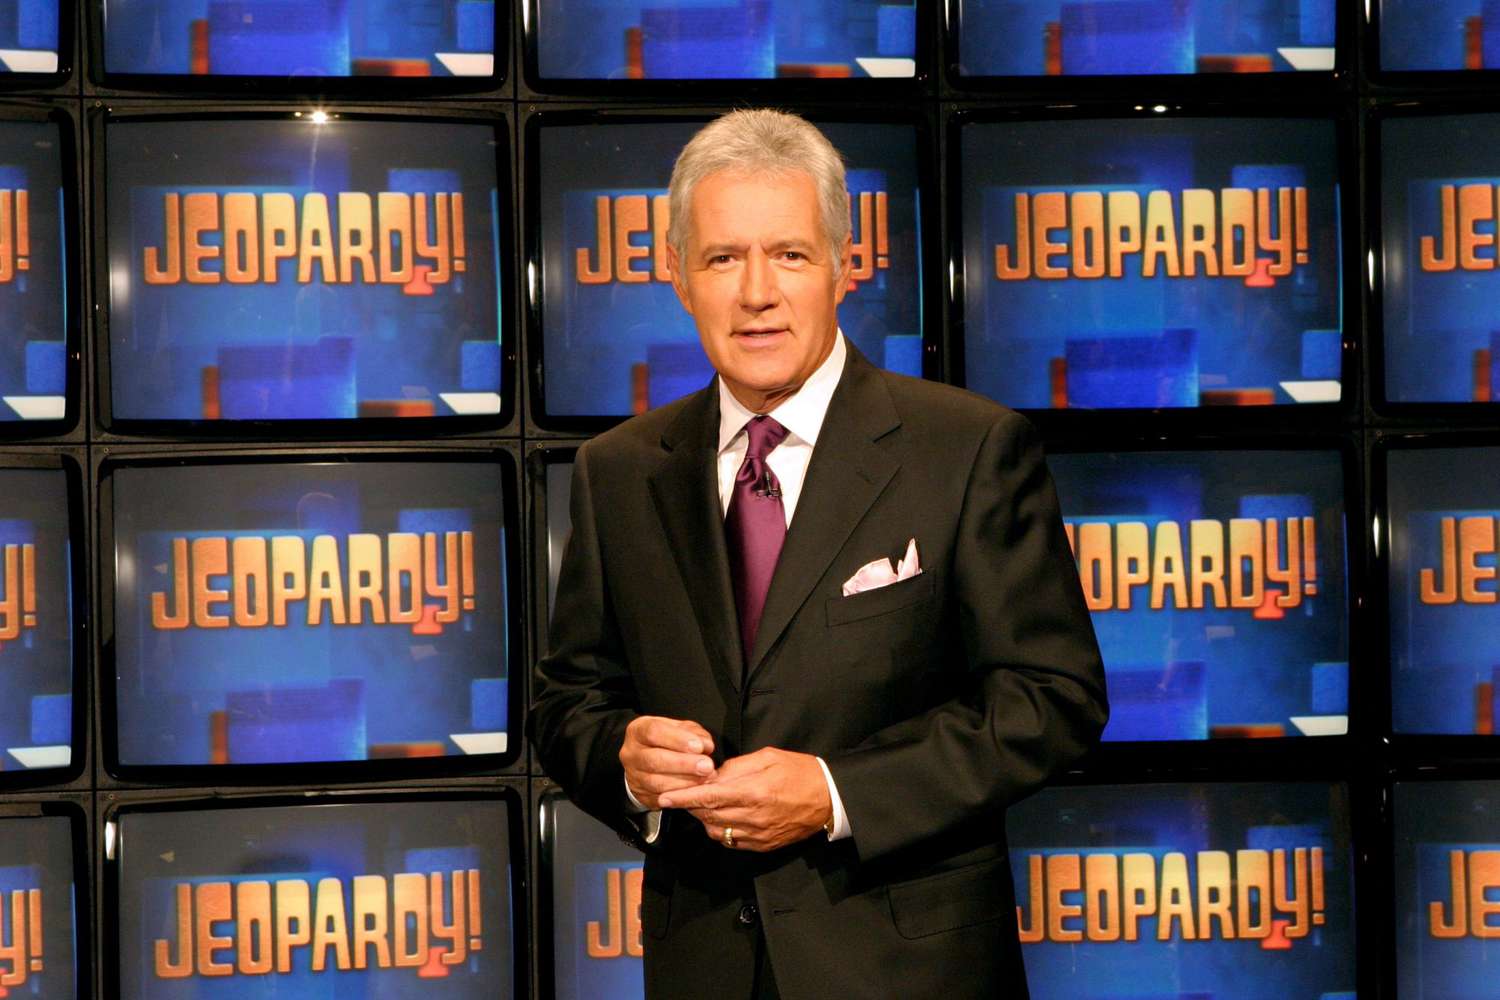 Jeopardy! (1964-1975, 1978-1979, 1984-current)